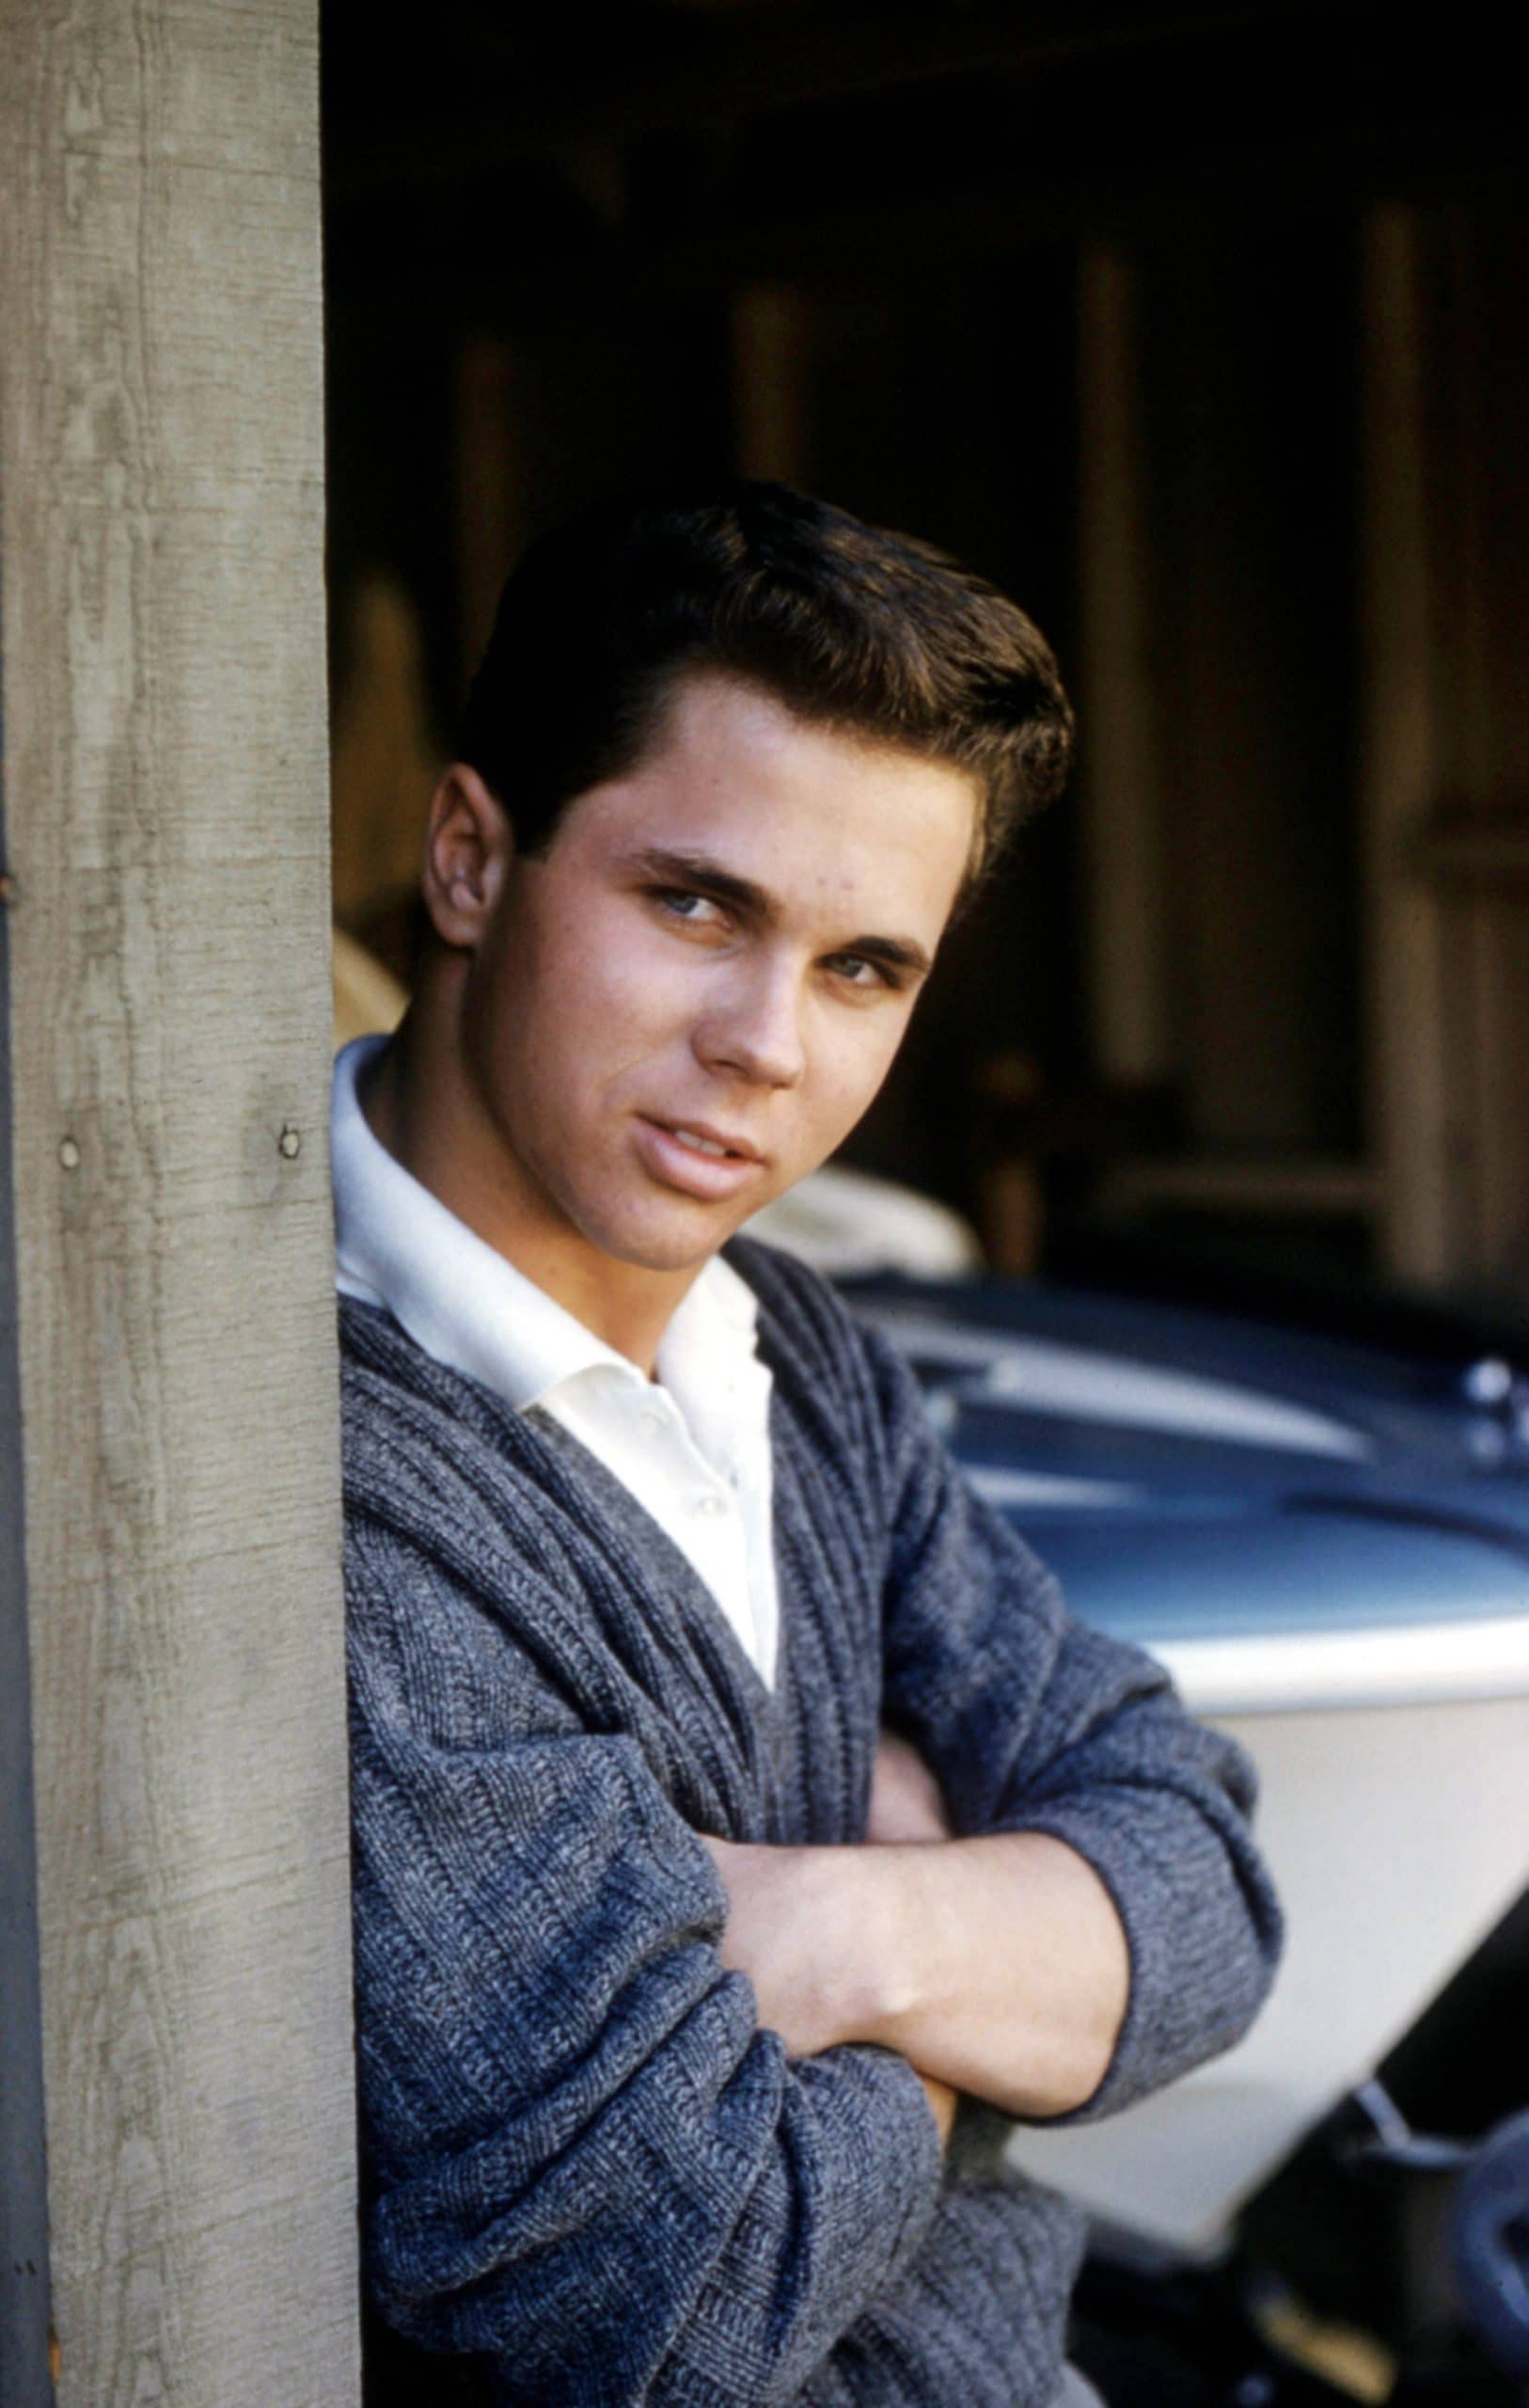 LEAVE IT TO BEAVER, Tony Dow, 1957-63 (ca. 1960 photo by Gene Trindl)